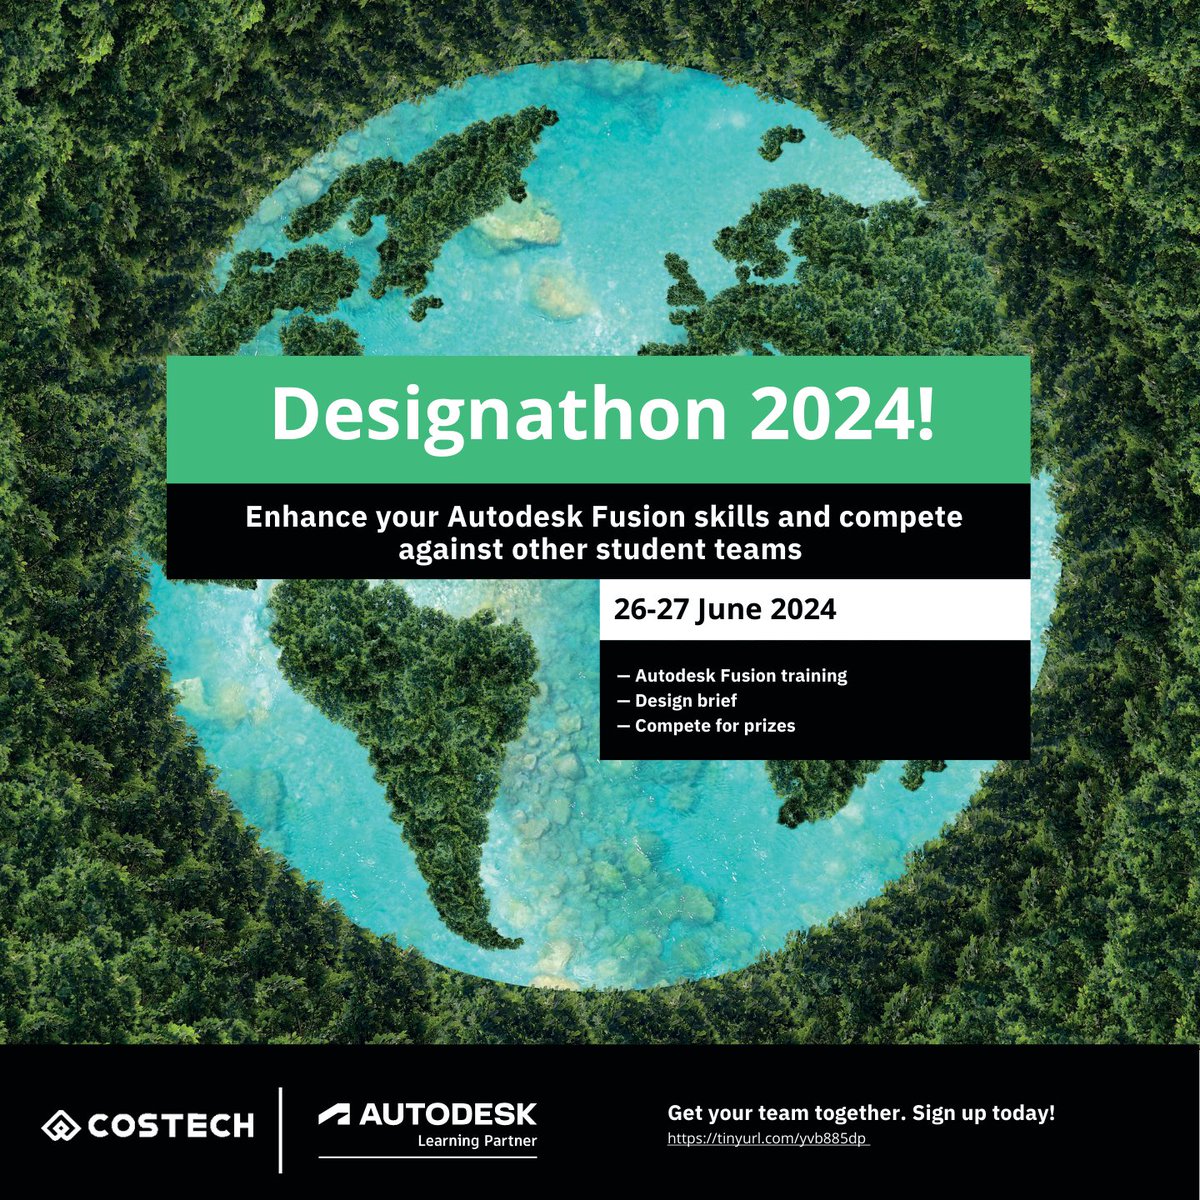 If you’re an engineering or industrial design student, Designathon 2024 is for you!

Take part in Designathon 2024 holding 26-27 June!
We’re accepting entries for teams comprising 2 or 3 students.
Register now:
tinyurl.com/yvb885dp 

#Designathon2024 #AutodeskFusion